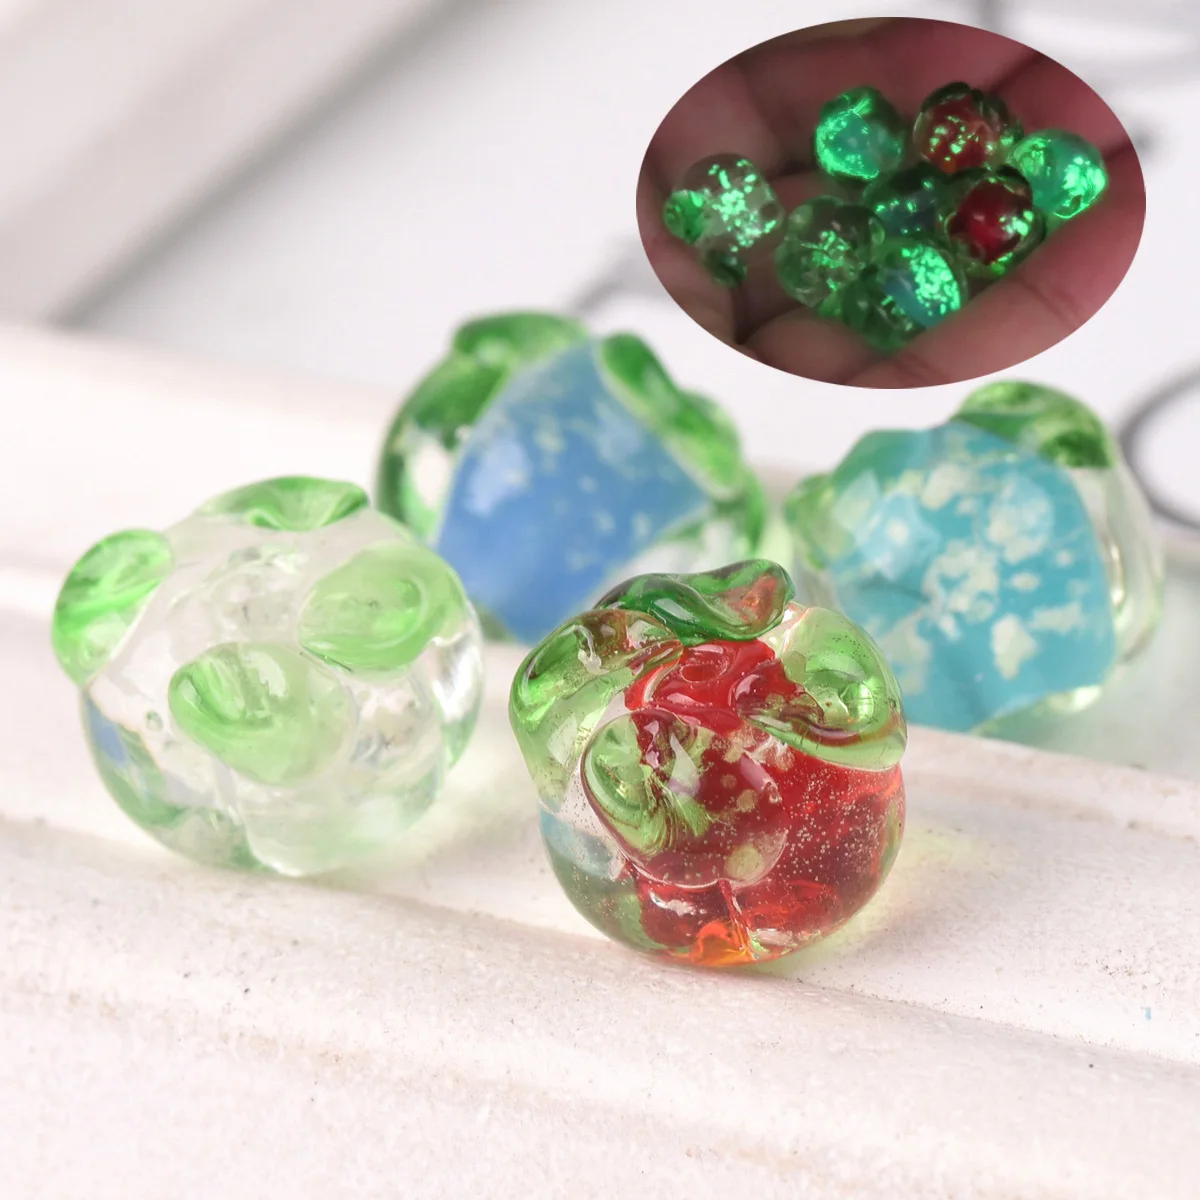 5pcs 12mm Round Luminous Persimmon Shape Handmade Lampwork Glass Loose Beads for Jewelry Making DIY Crafts Findings 10pcs round 6mm 8mm 10mm 12mm no luminous handmade lampwork glass loose beads for jewelry making diy crafts findings